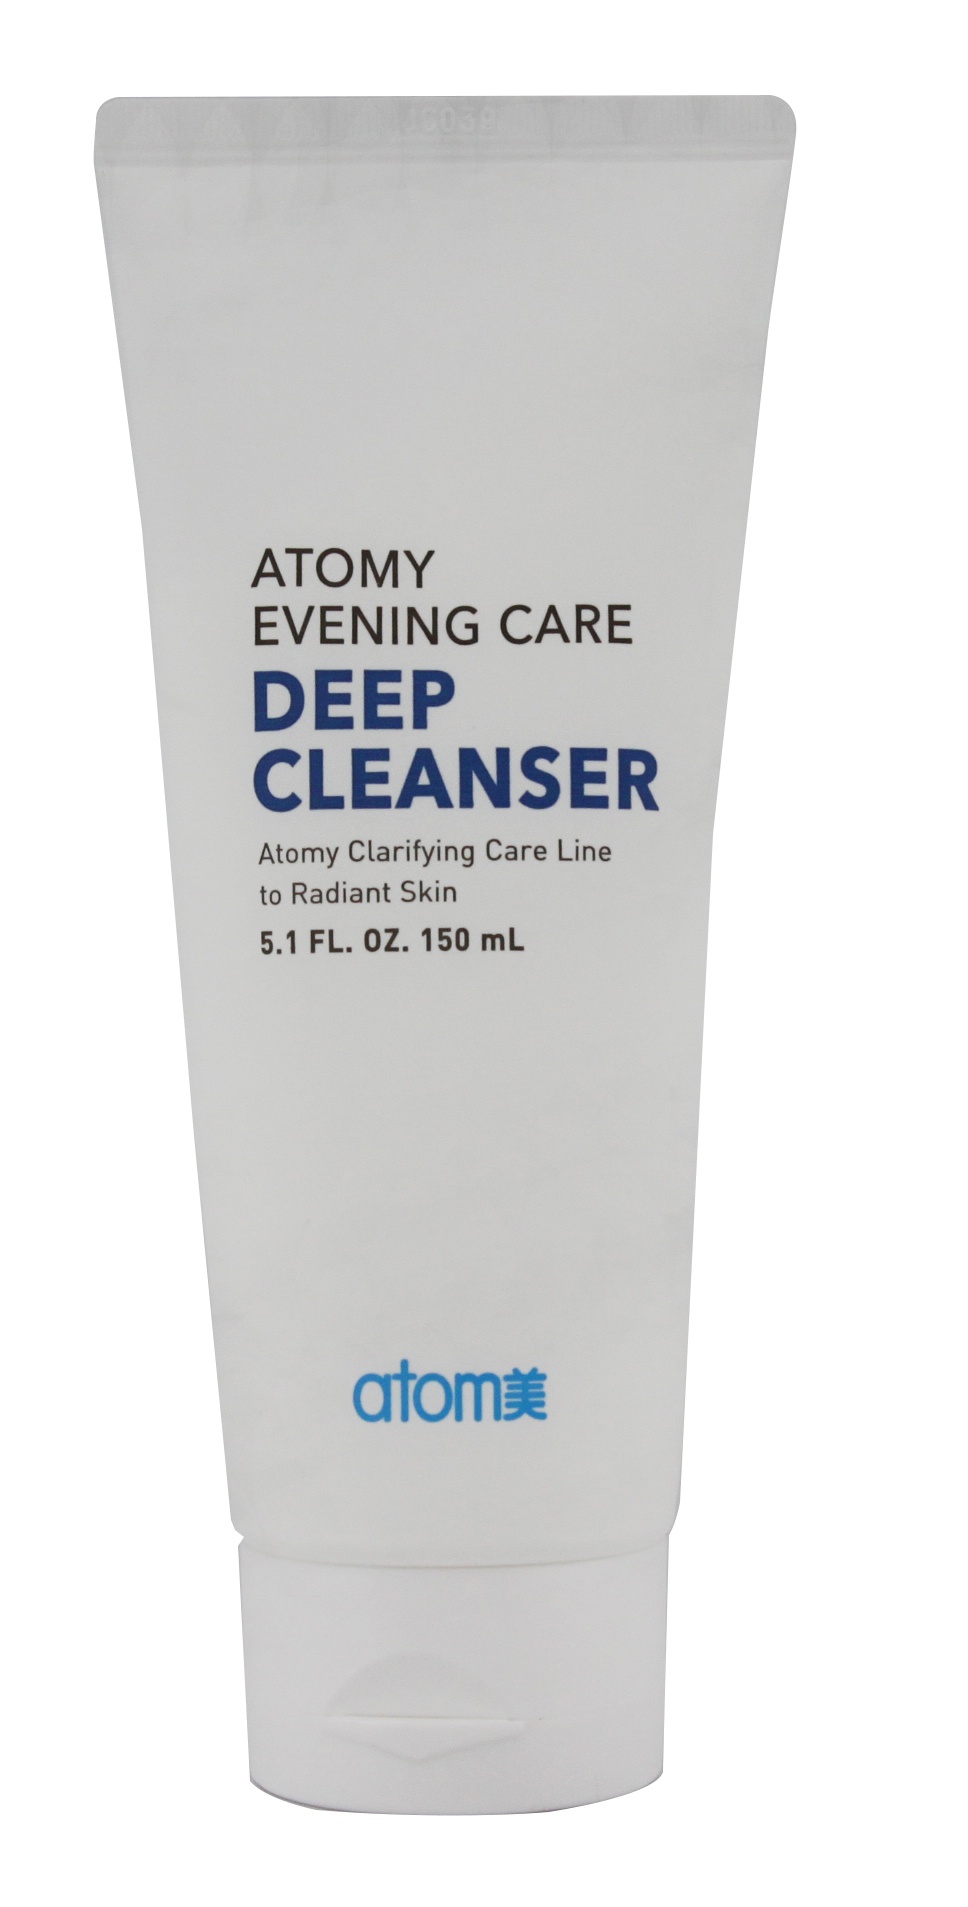 Atomy evening Care Deep Cleanser